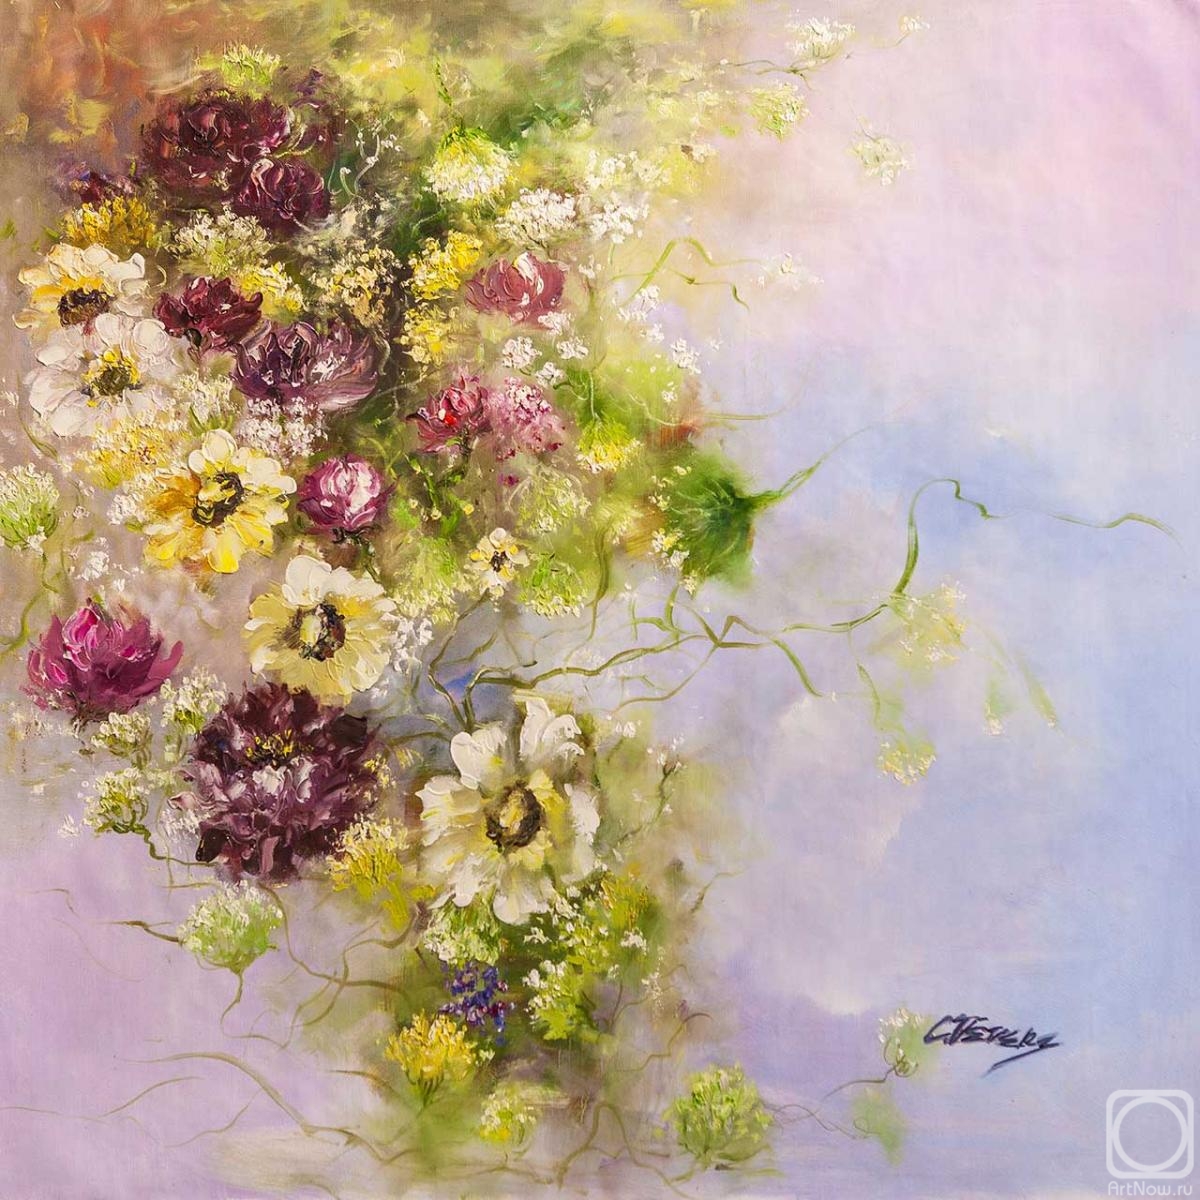 Vevers Christina. Melody of a spring bouquet